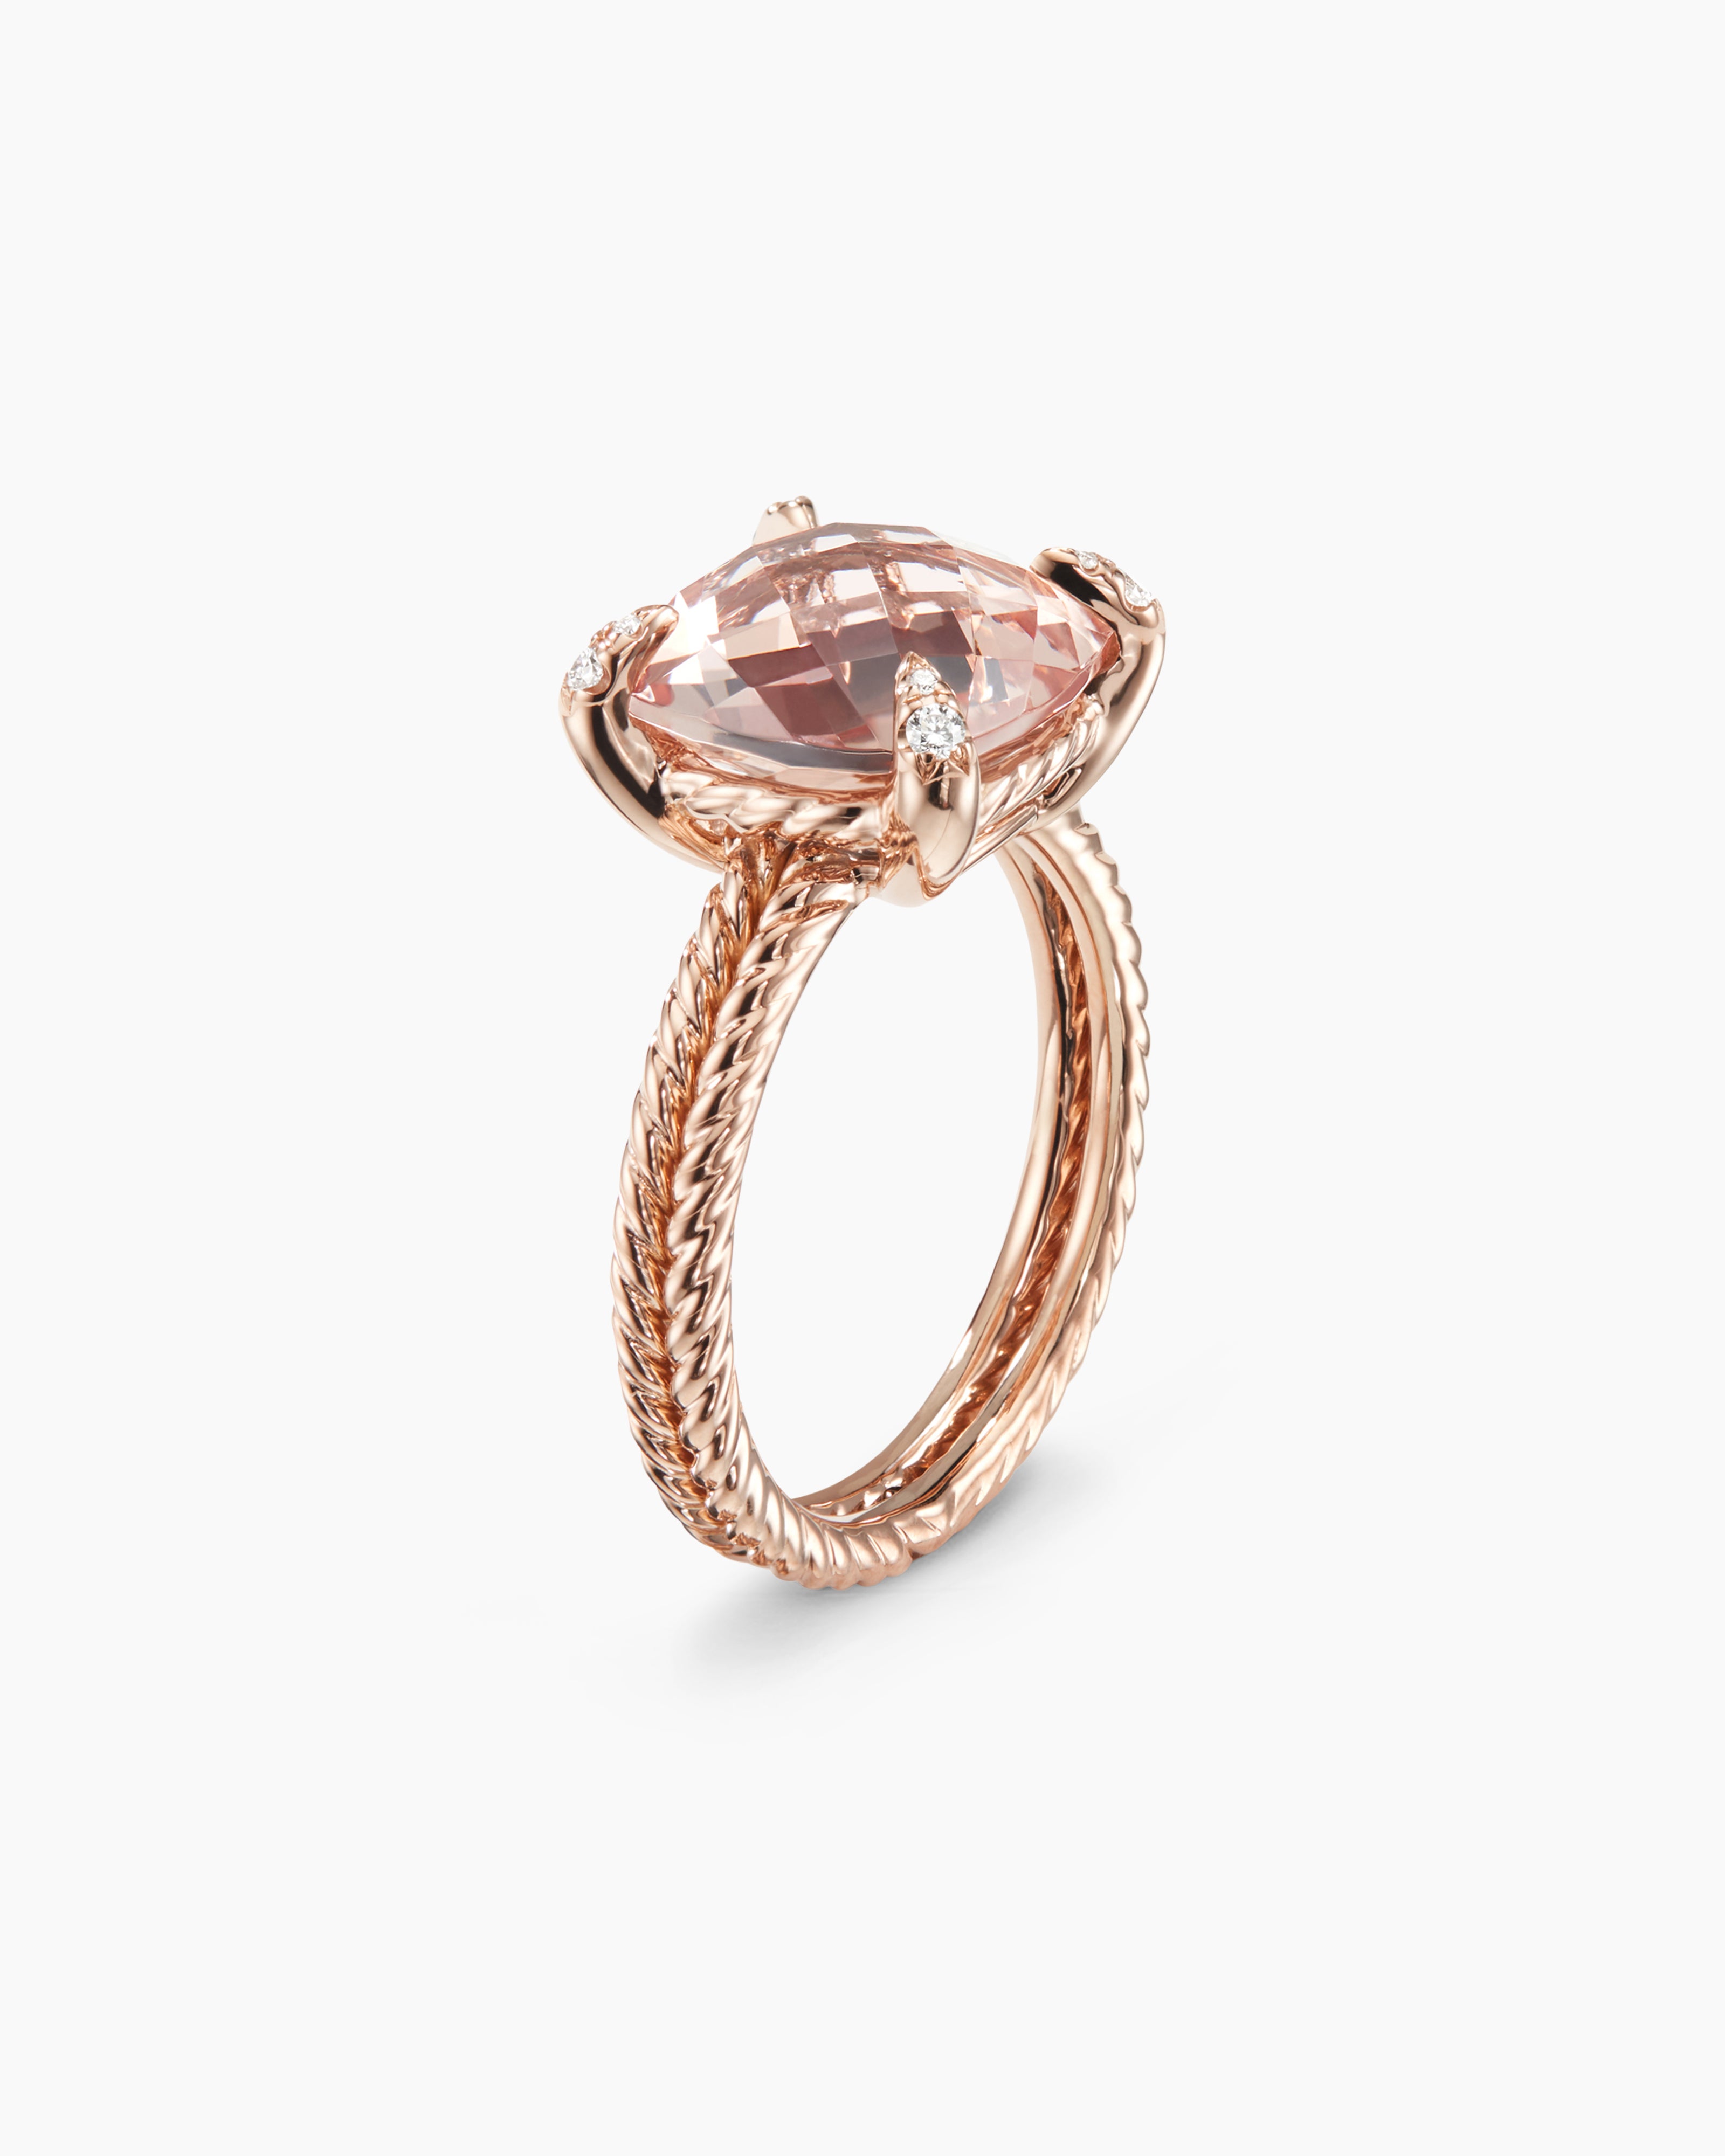 Shop Pink Sapphire 18K Rose Gold Ring Online in India |Gehna